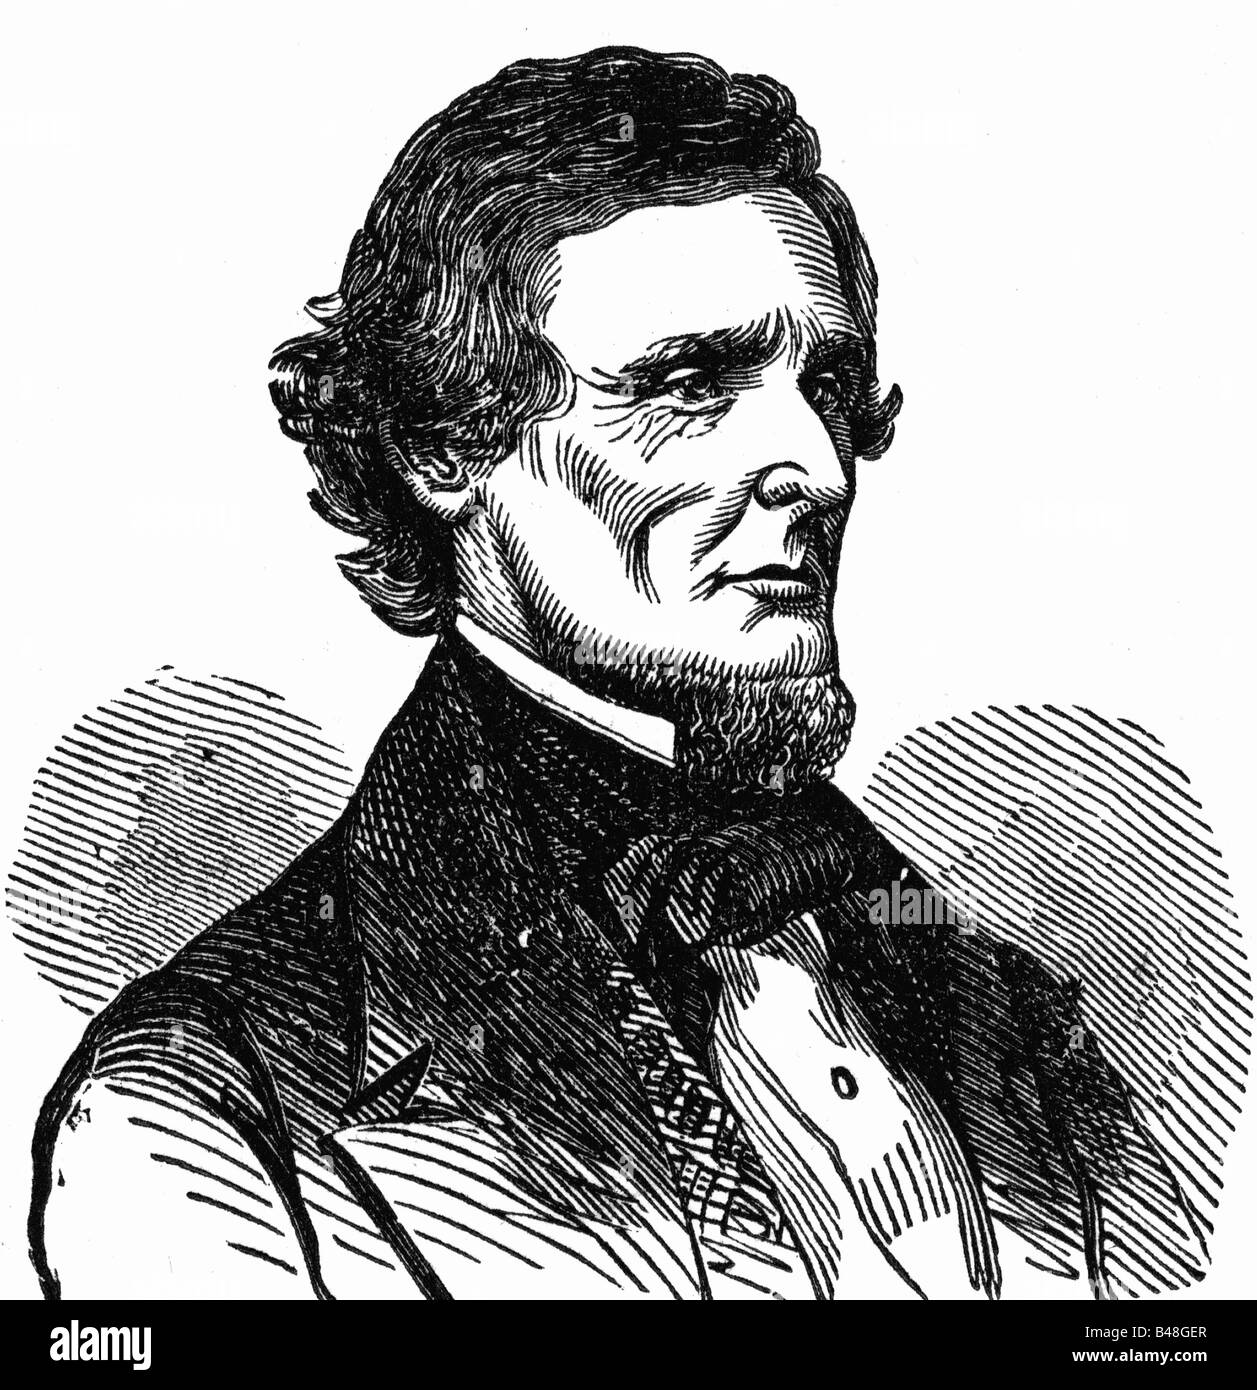 Davis, Jefferson, 3.6.1808 - 9.12.1889, American politician, President of the Confederate States of America, 18.2.1861 - 10.5.1865, portrait, wood engraving, after drawing, 19th century, , Stock Photo